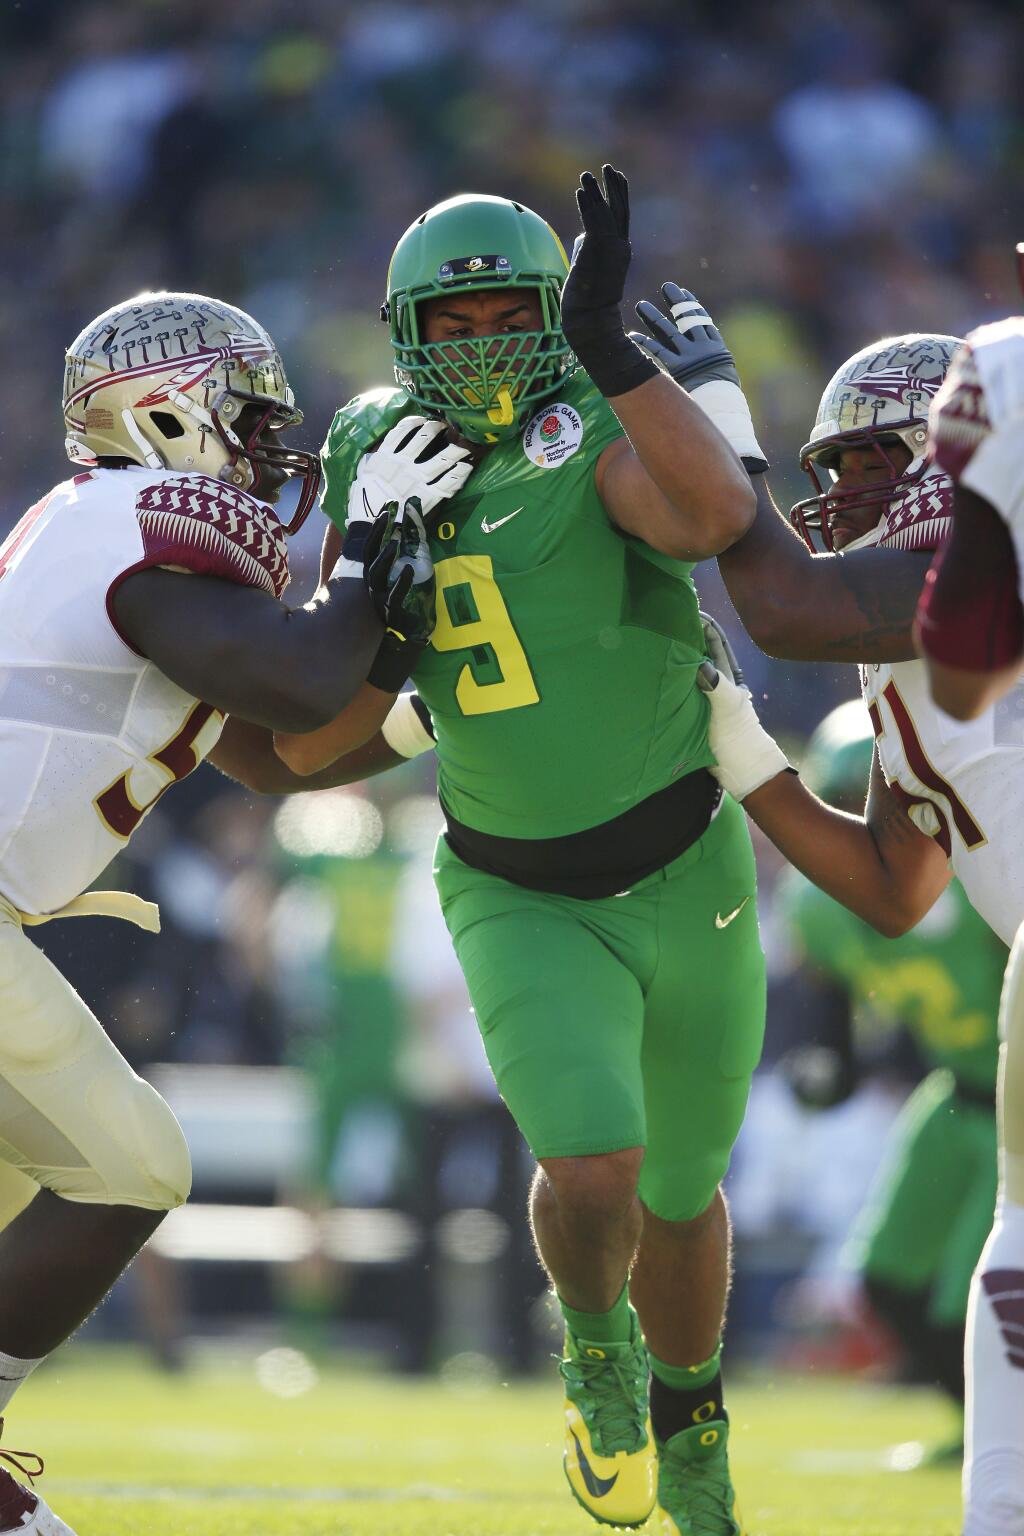 Oregon defensive lineman Arik Armstead (9) rushes against Florida State in the Rose Bowl college football playoff semifinal, Thursday, Jan. 1, 2015 in Pasadena. Oregon defeated Florida State 59-20 to advance to the first-ever NCAA football playoff championship game. (AP Photo/Doug Benc)